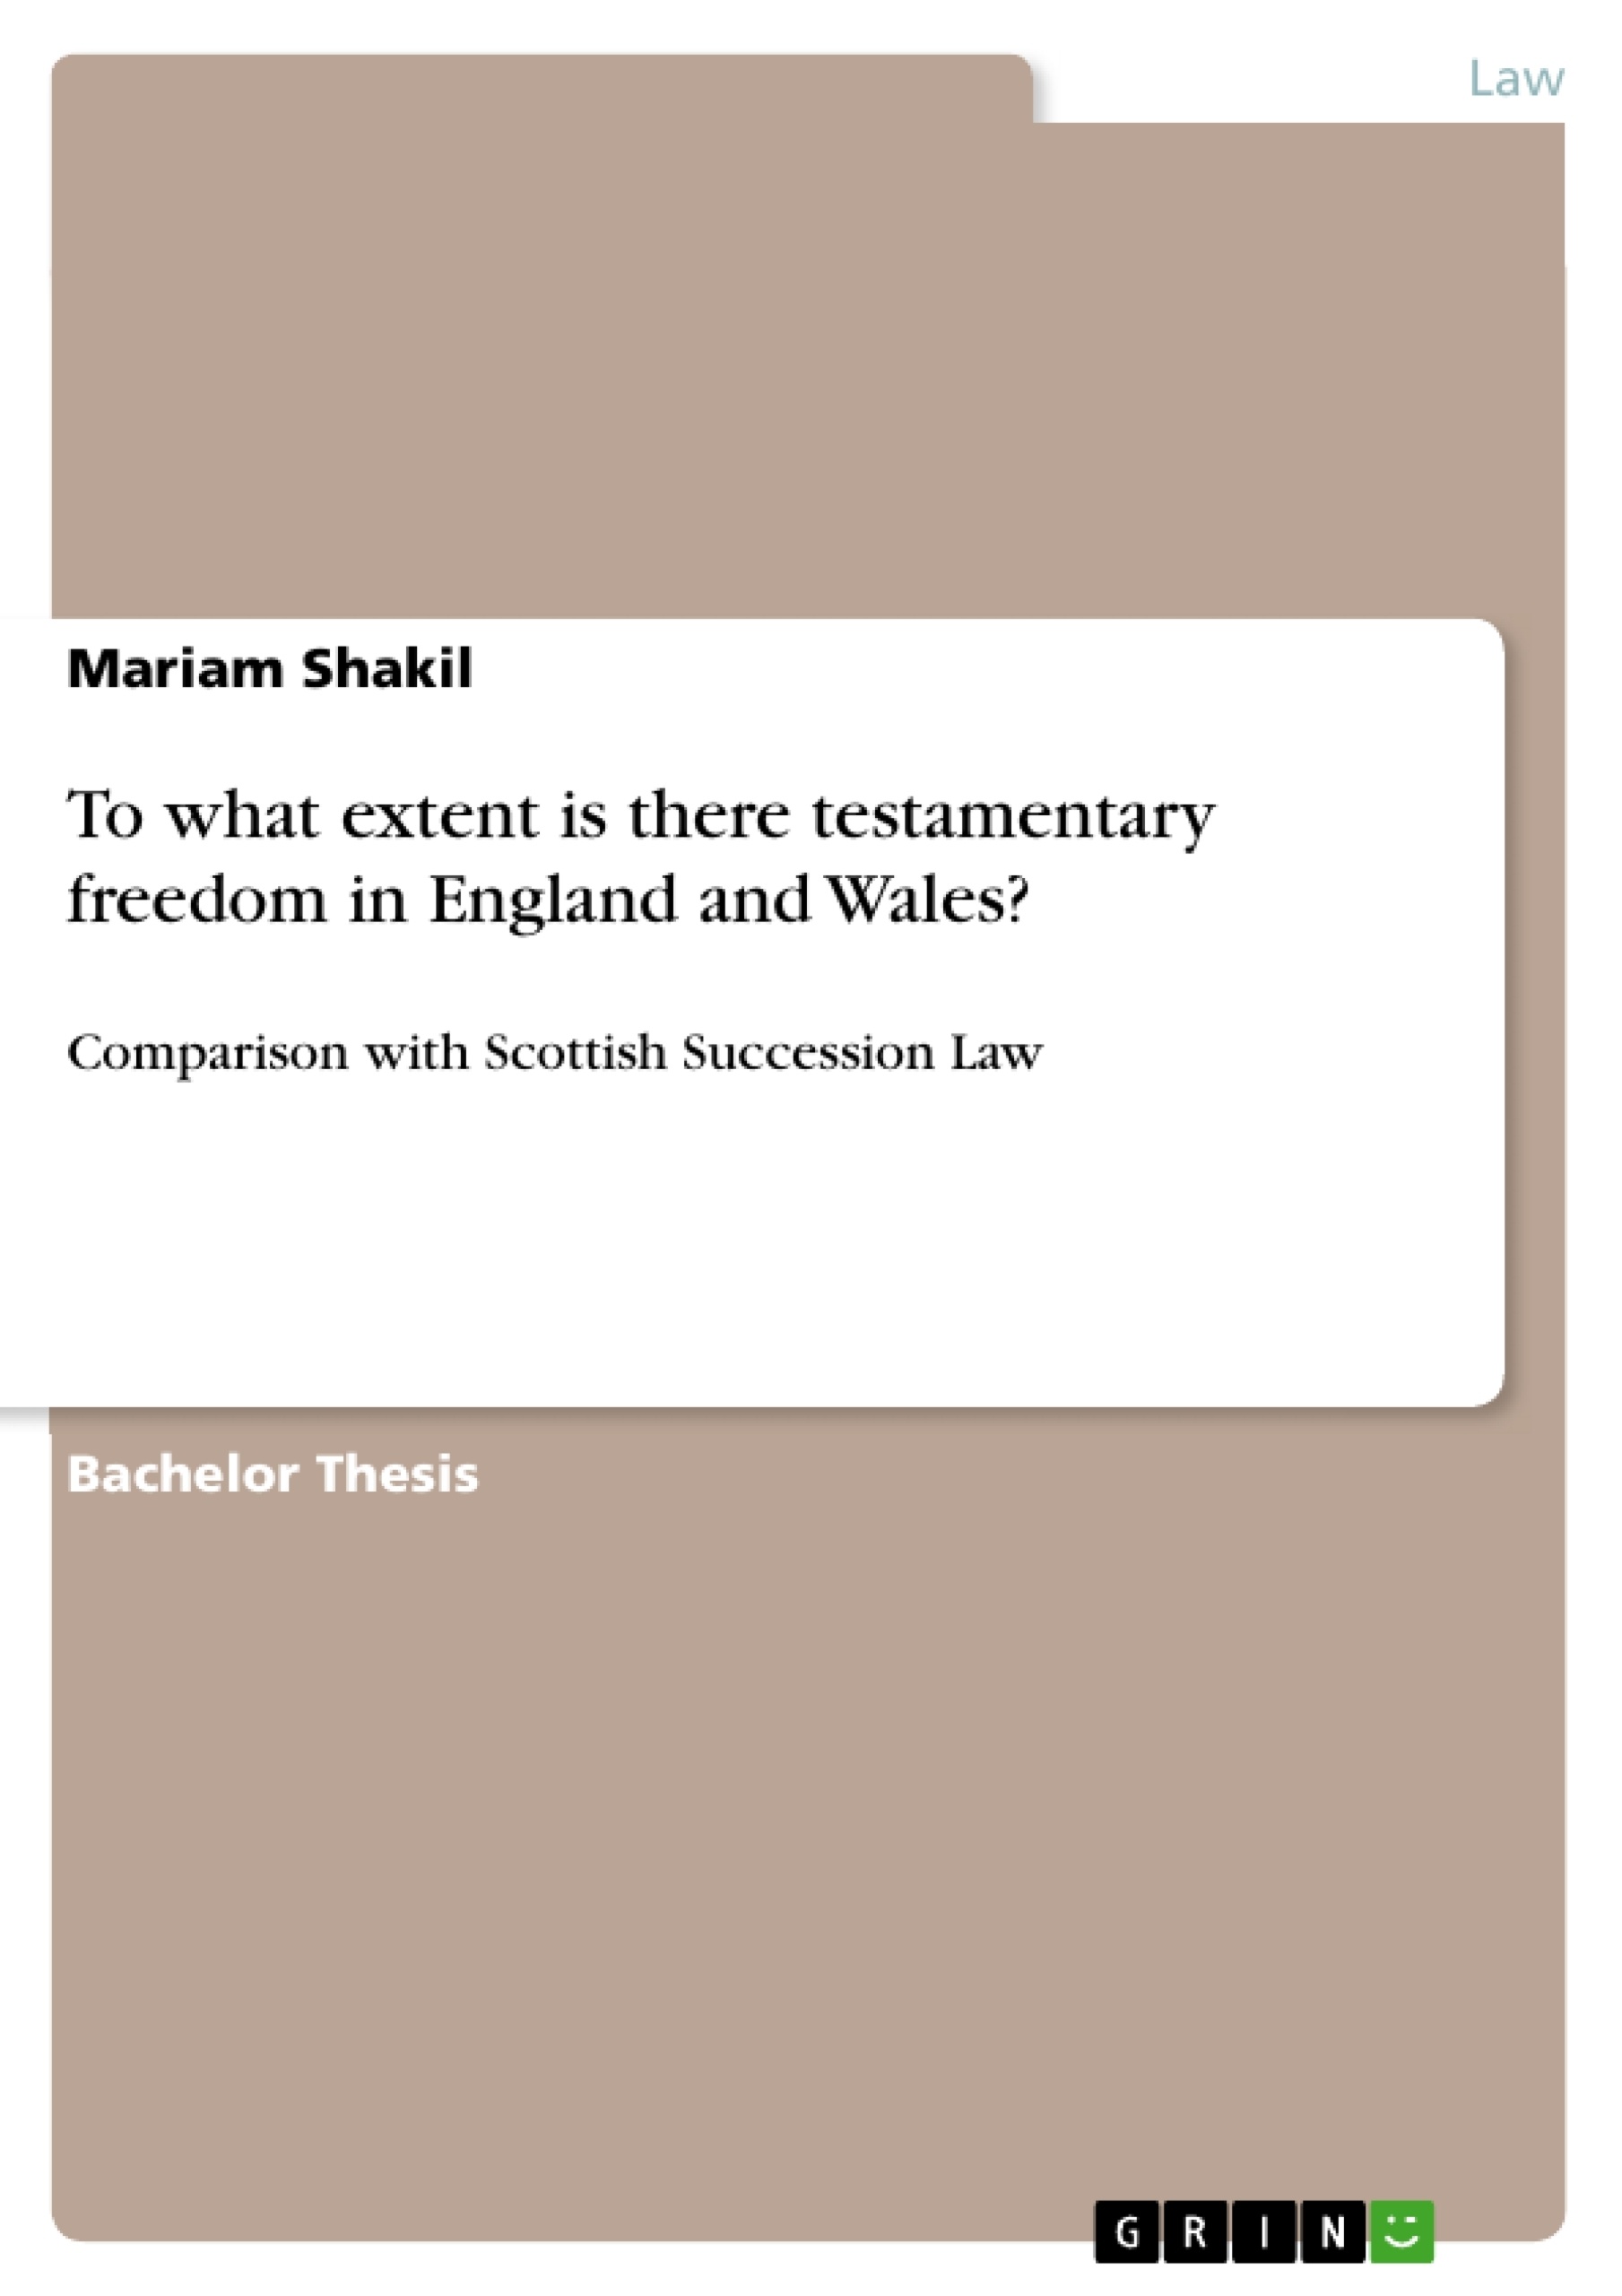 Título: To what extent is there testamentary freedom in England and Wales?